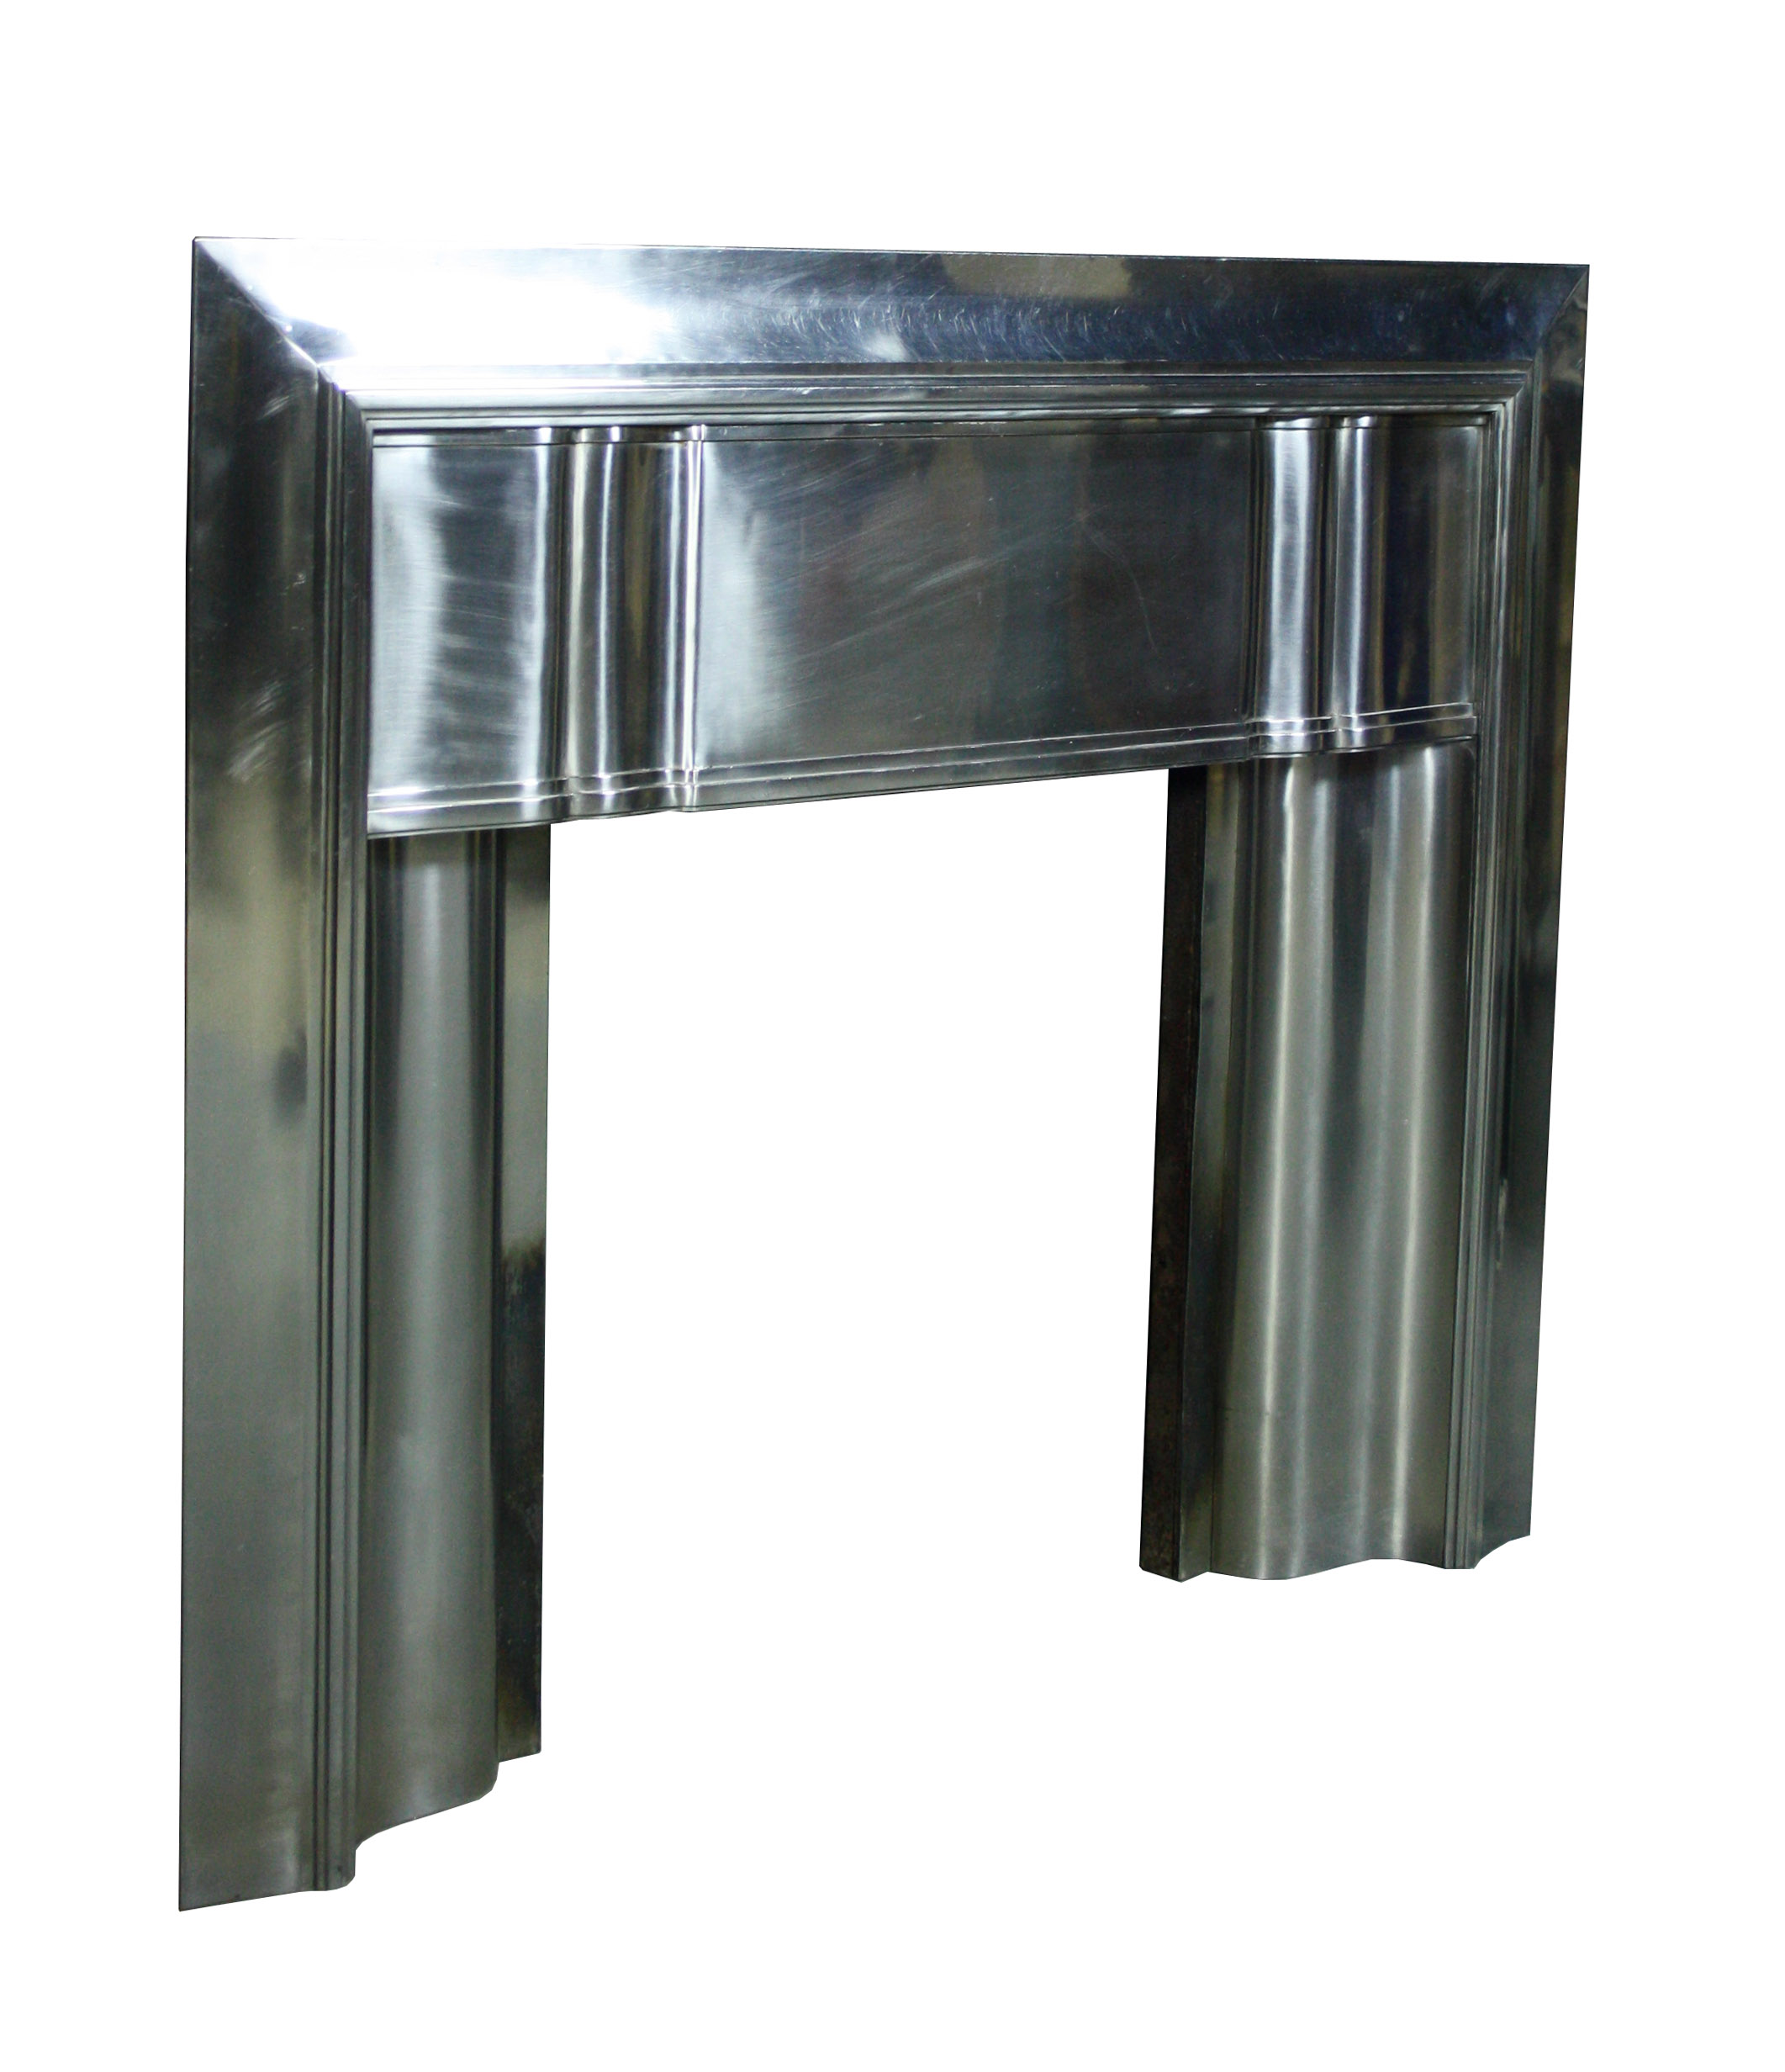 An Original Art Deco Stainless Steel, Stainless Steel Fire Surround